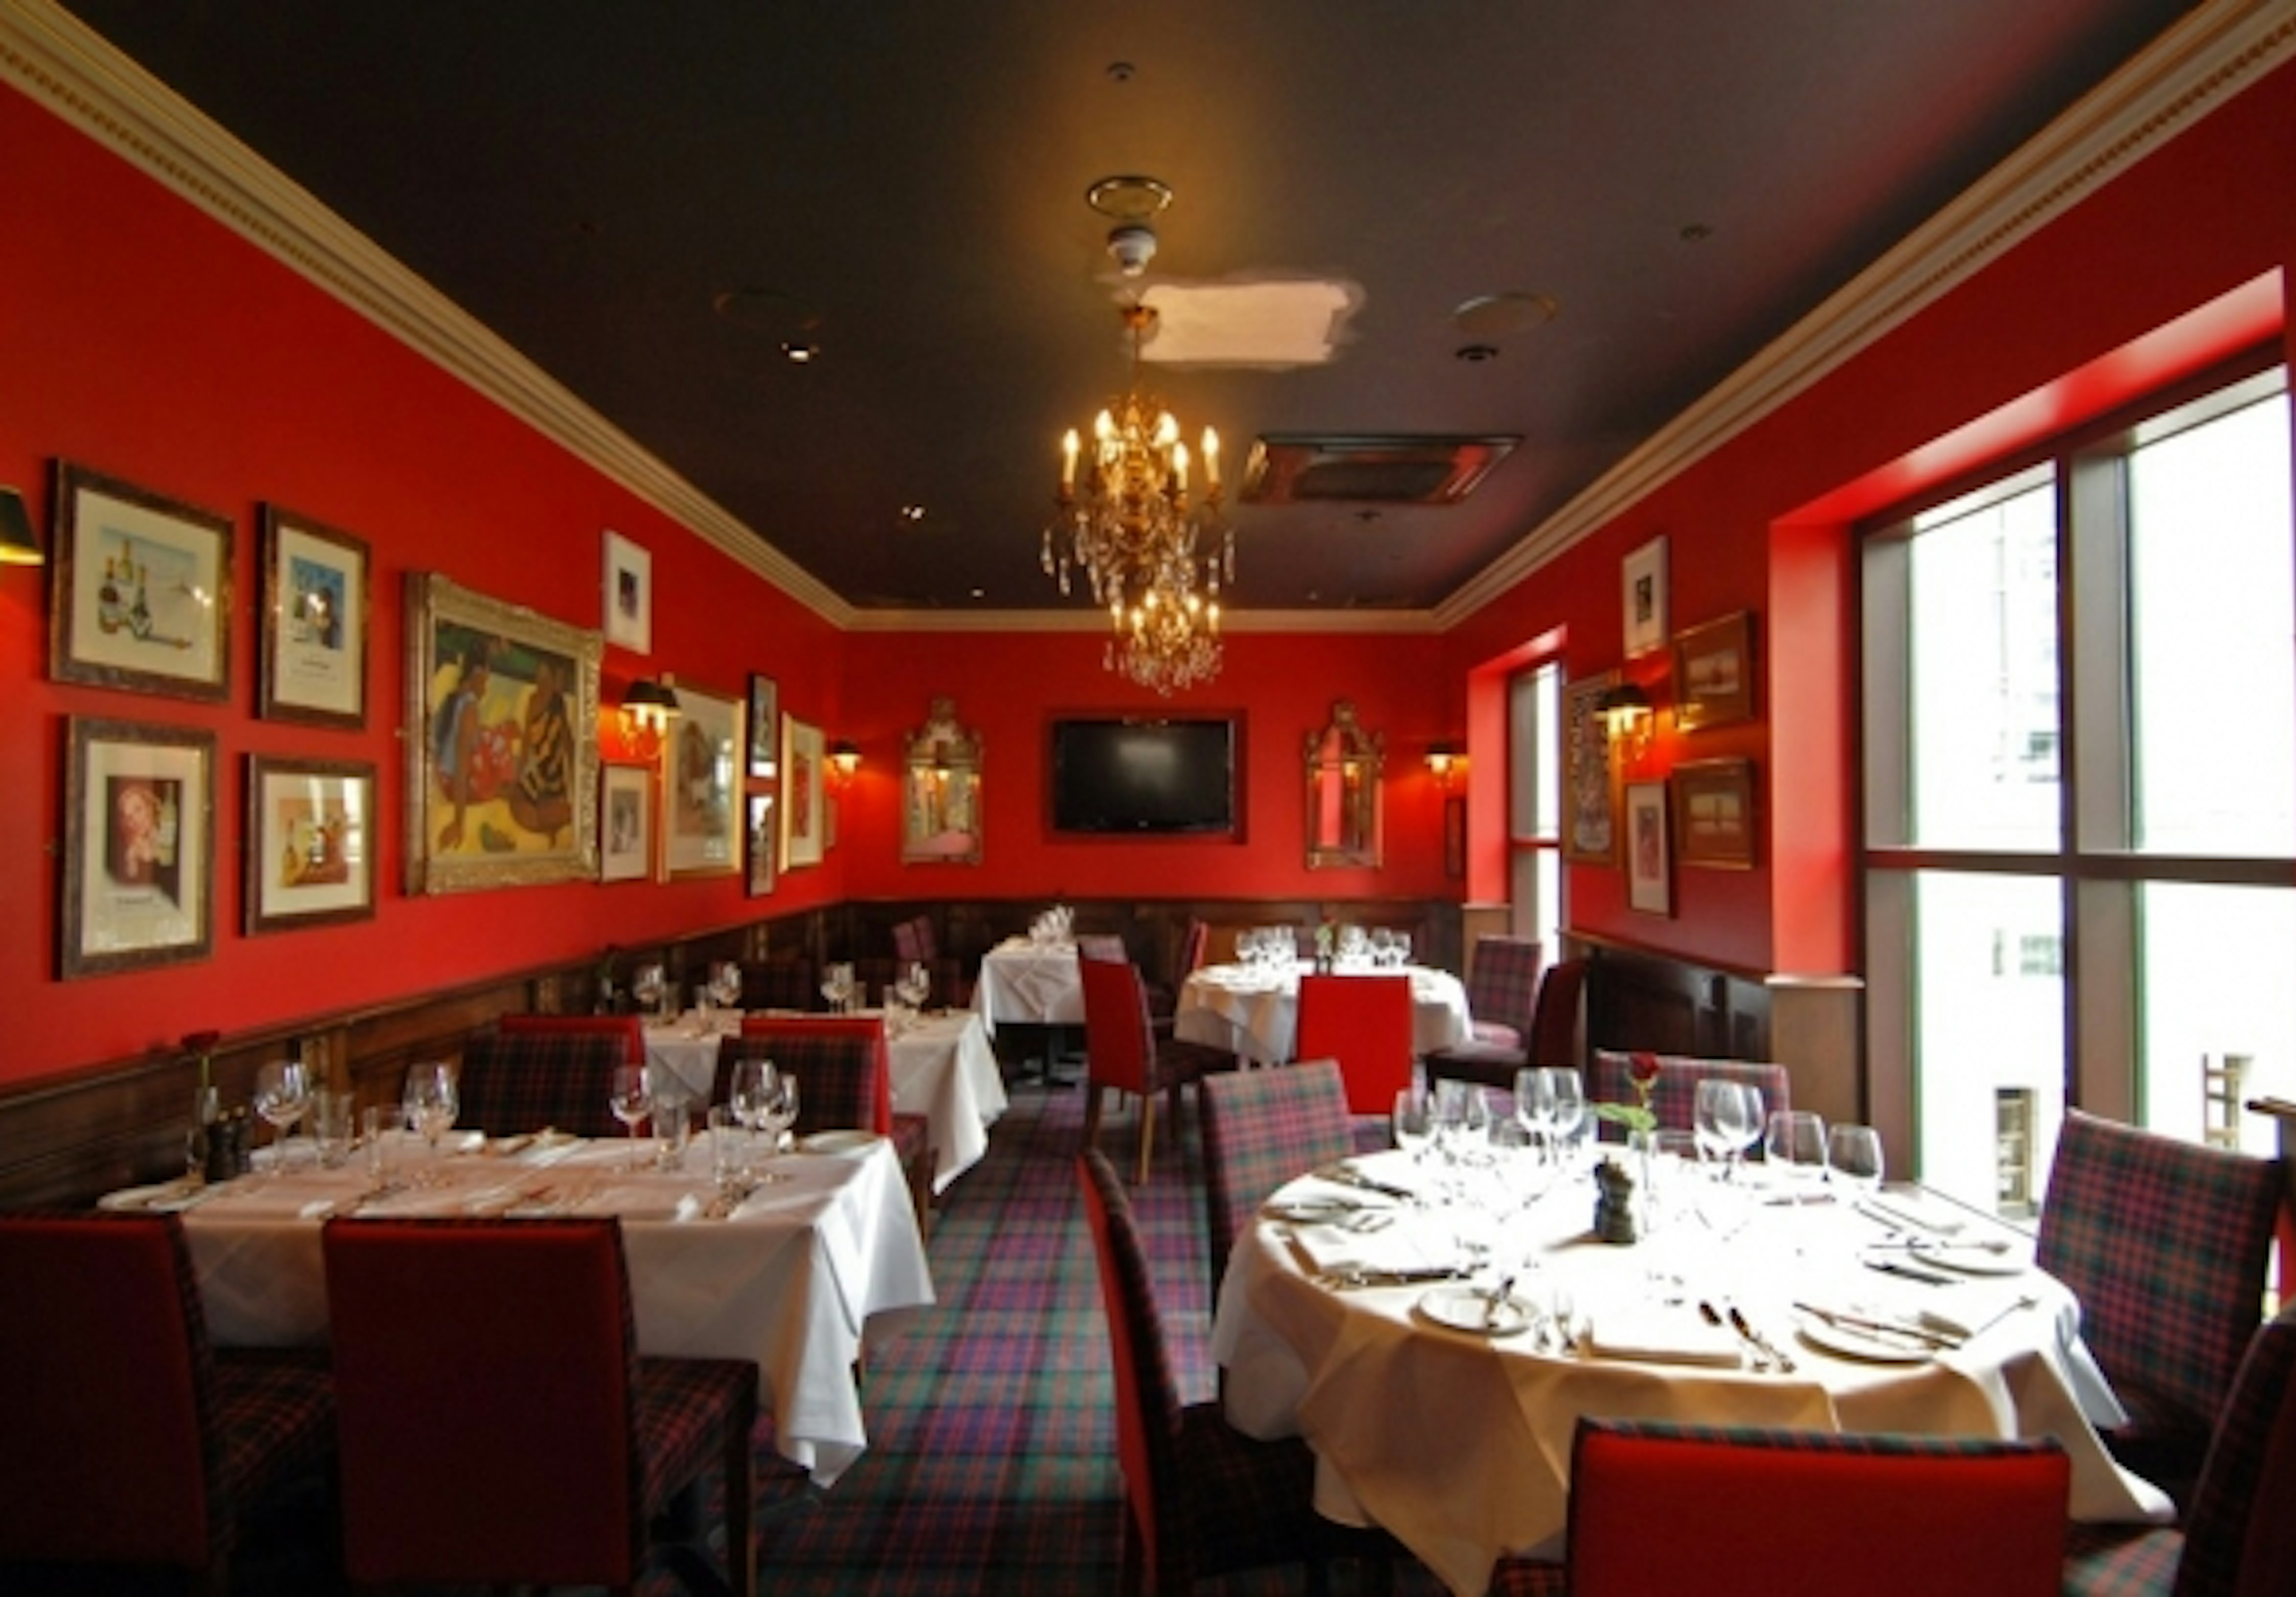 Events - Boisdale of Canary Wharf